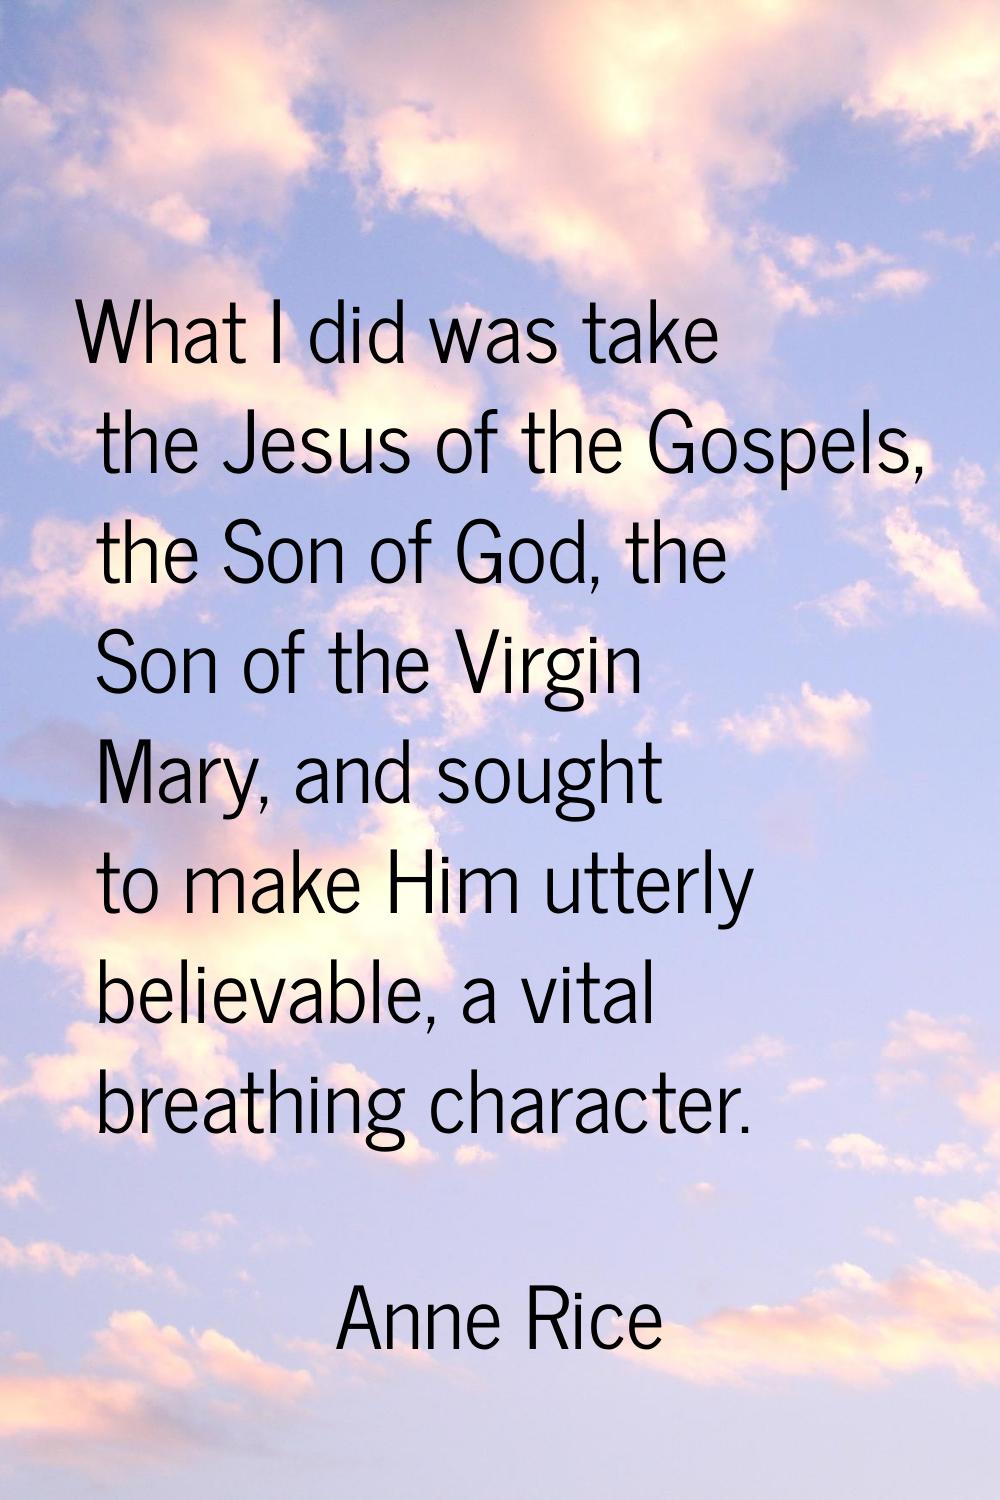 What I did was take the Jesus of the Gospels, the Son of God, the Son of the Virgin Mary, and sough